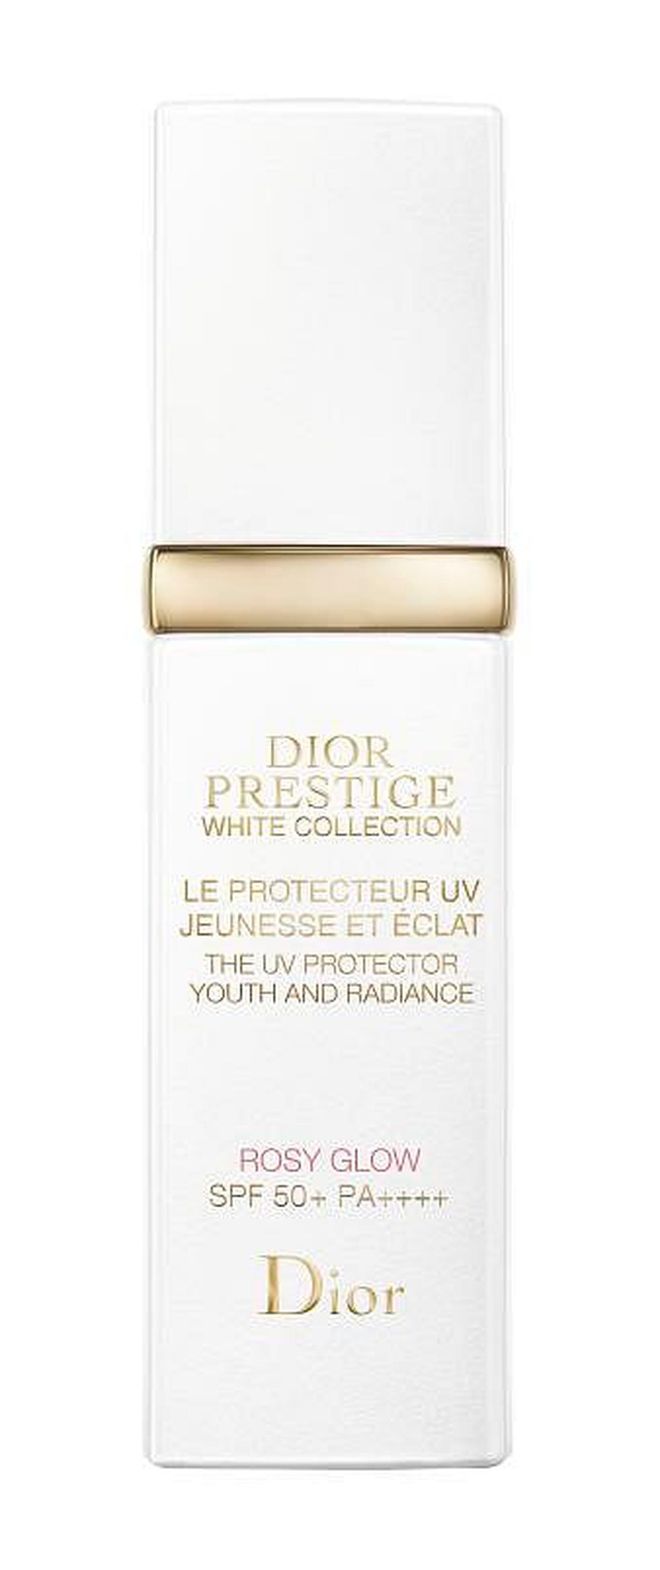 Prestige White The UV Protector Youth and Radiance Rosy Glow SPF 50+ PA++++, $165, Dior